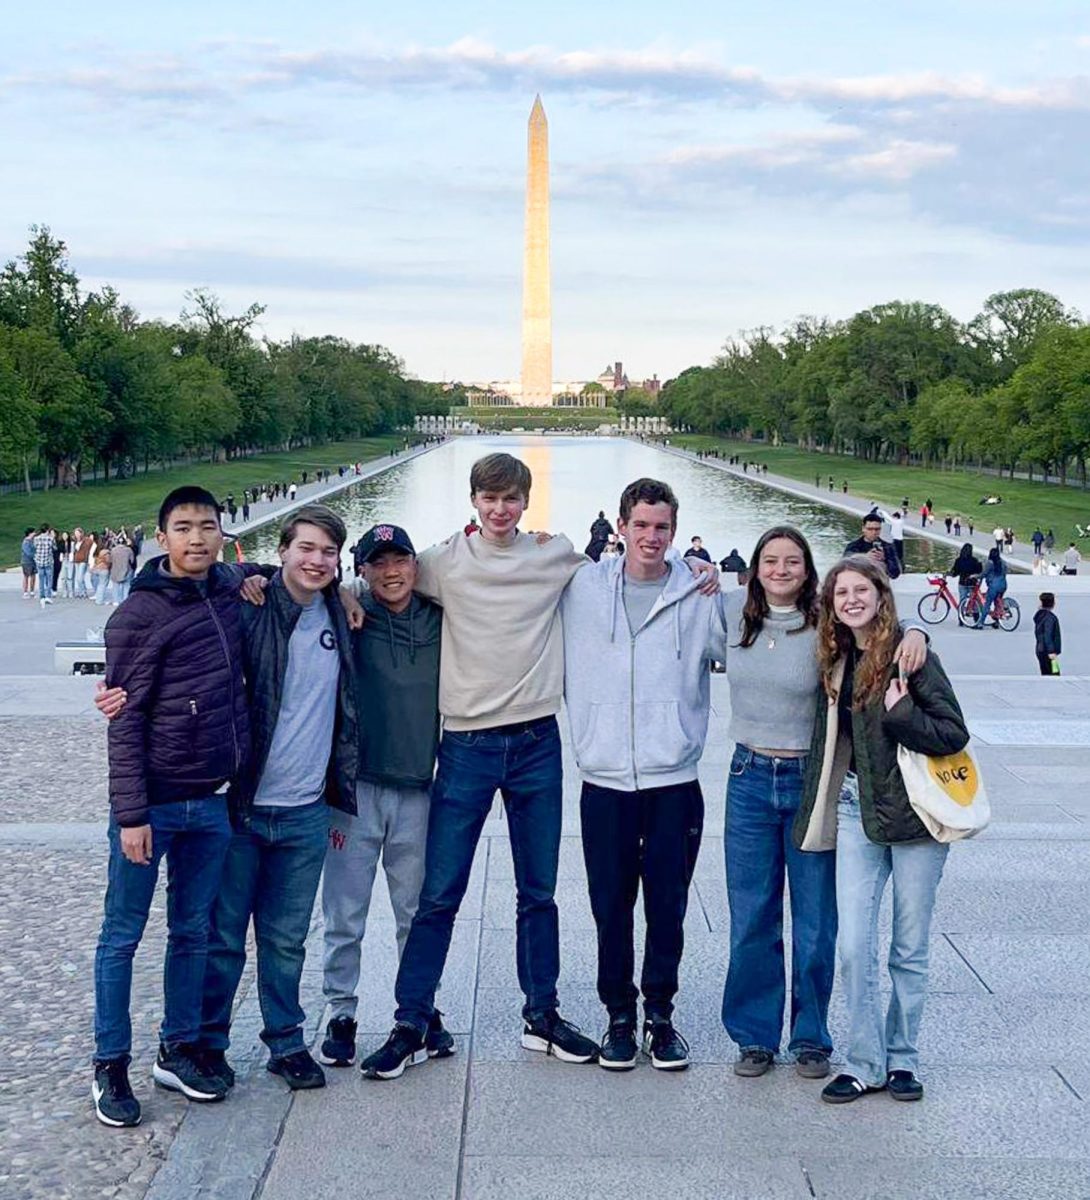 Students from both History Bowl teams pose at the National Mall in Washington D.C. On the trip, they competed in the History Bowl Tournament as two teams and in individual competitions, in the National History Bee.